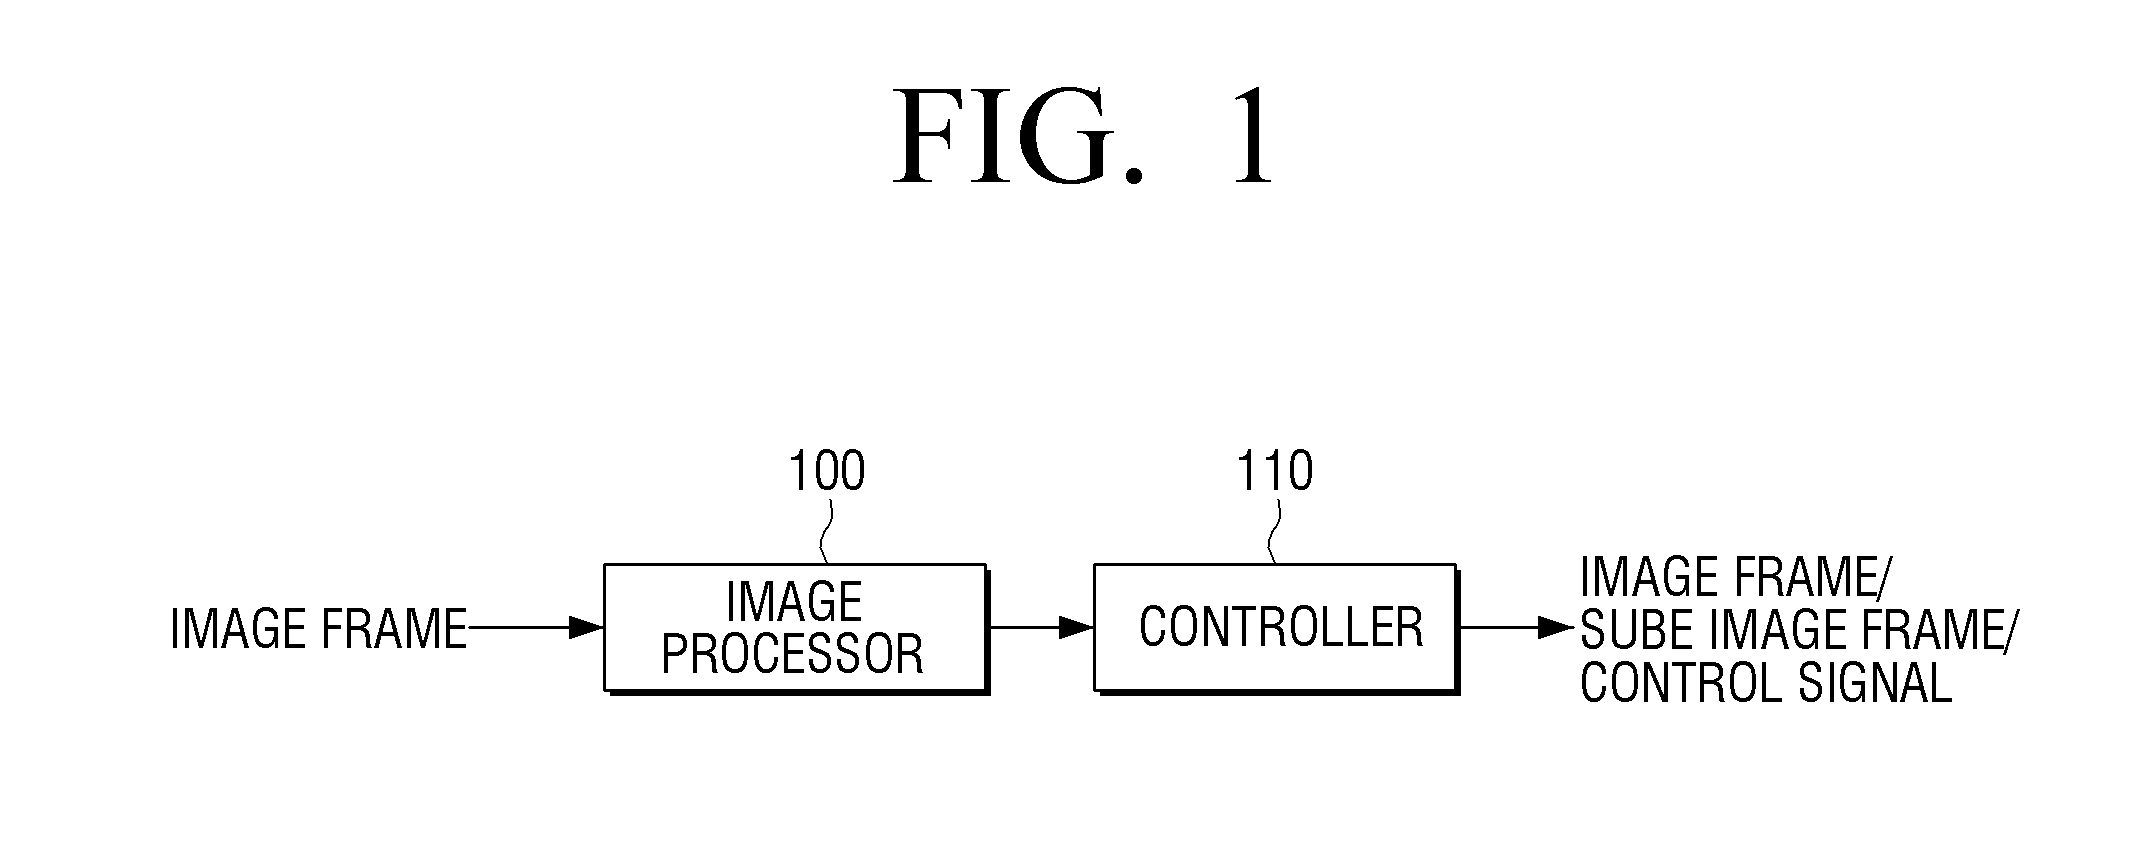 Apparatus and method for displaying images and apparatus and method for processing images